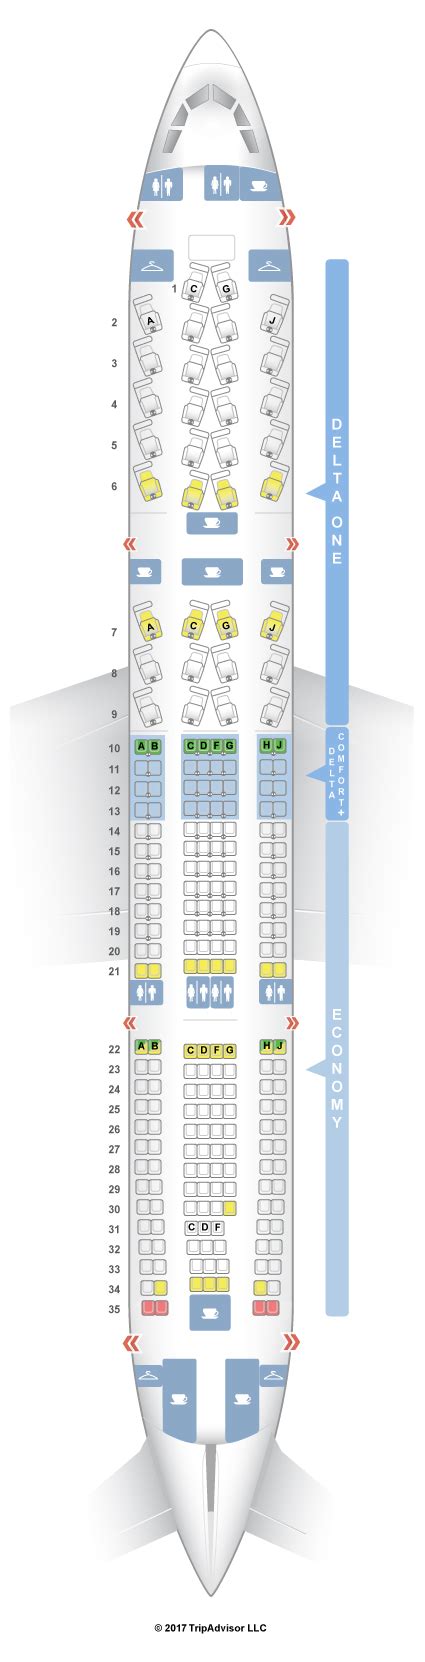 Delta a330 200 seat map. Additional information for each class is available in the "Travel Info / Onboard Experience" section on . The A321 is used on a variety of short and medium haul routes within the United States. This aircraft features 20 First Class recliner seats, 29 Delta Comfort+ seats, and 143 standard Economy seats. 